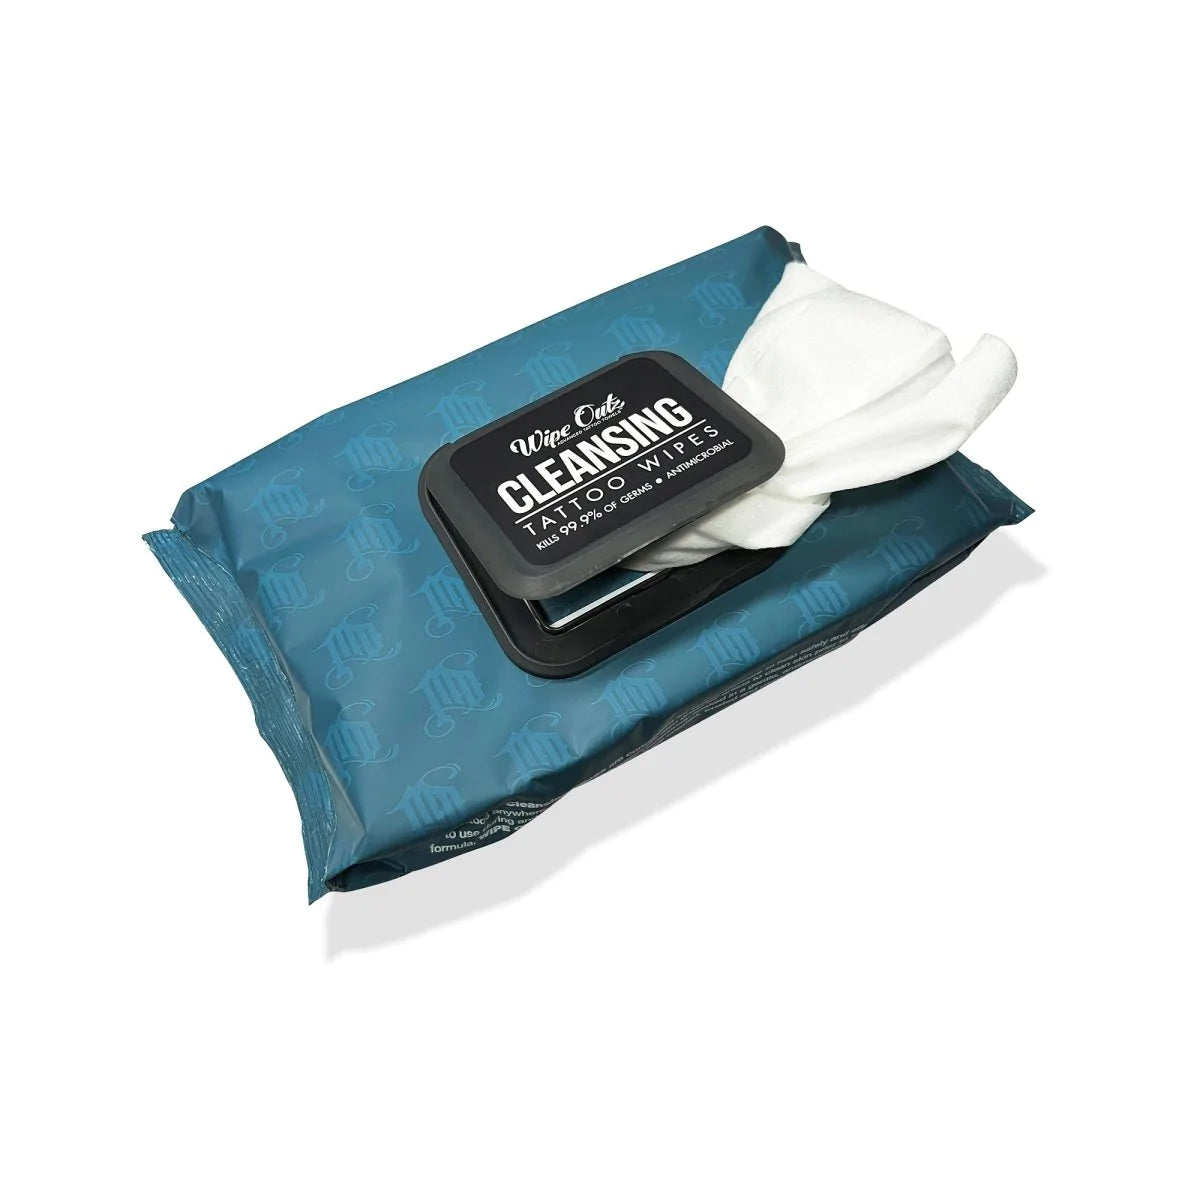 MD Wipe Outz™ New Cleansing Tattoo Wipes - 40 Pack